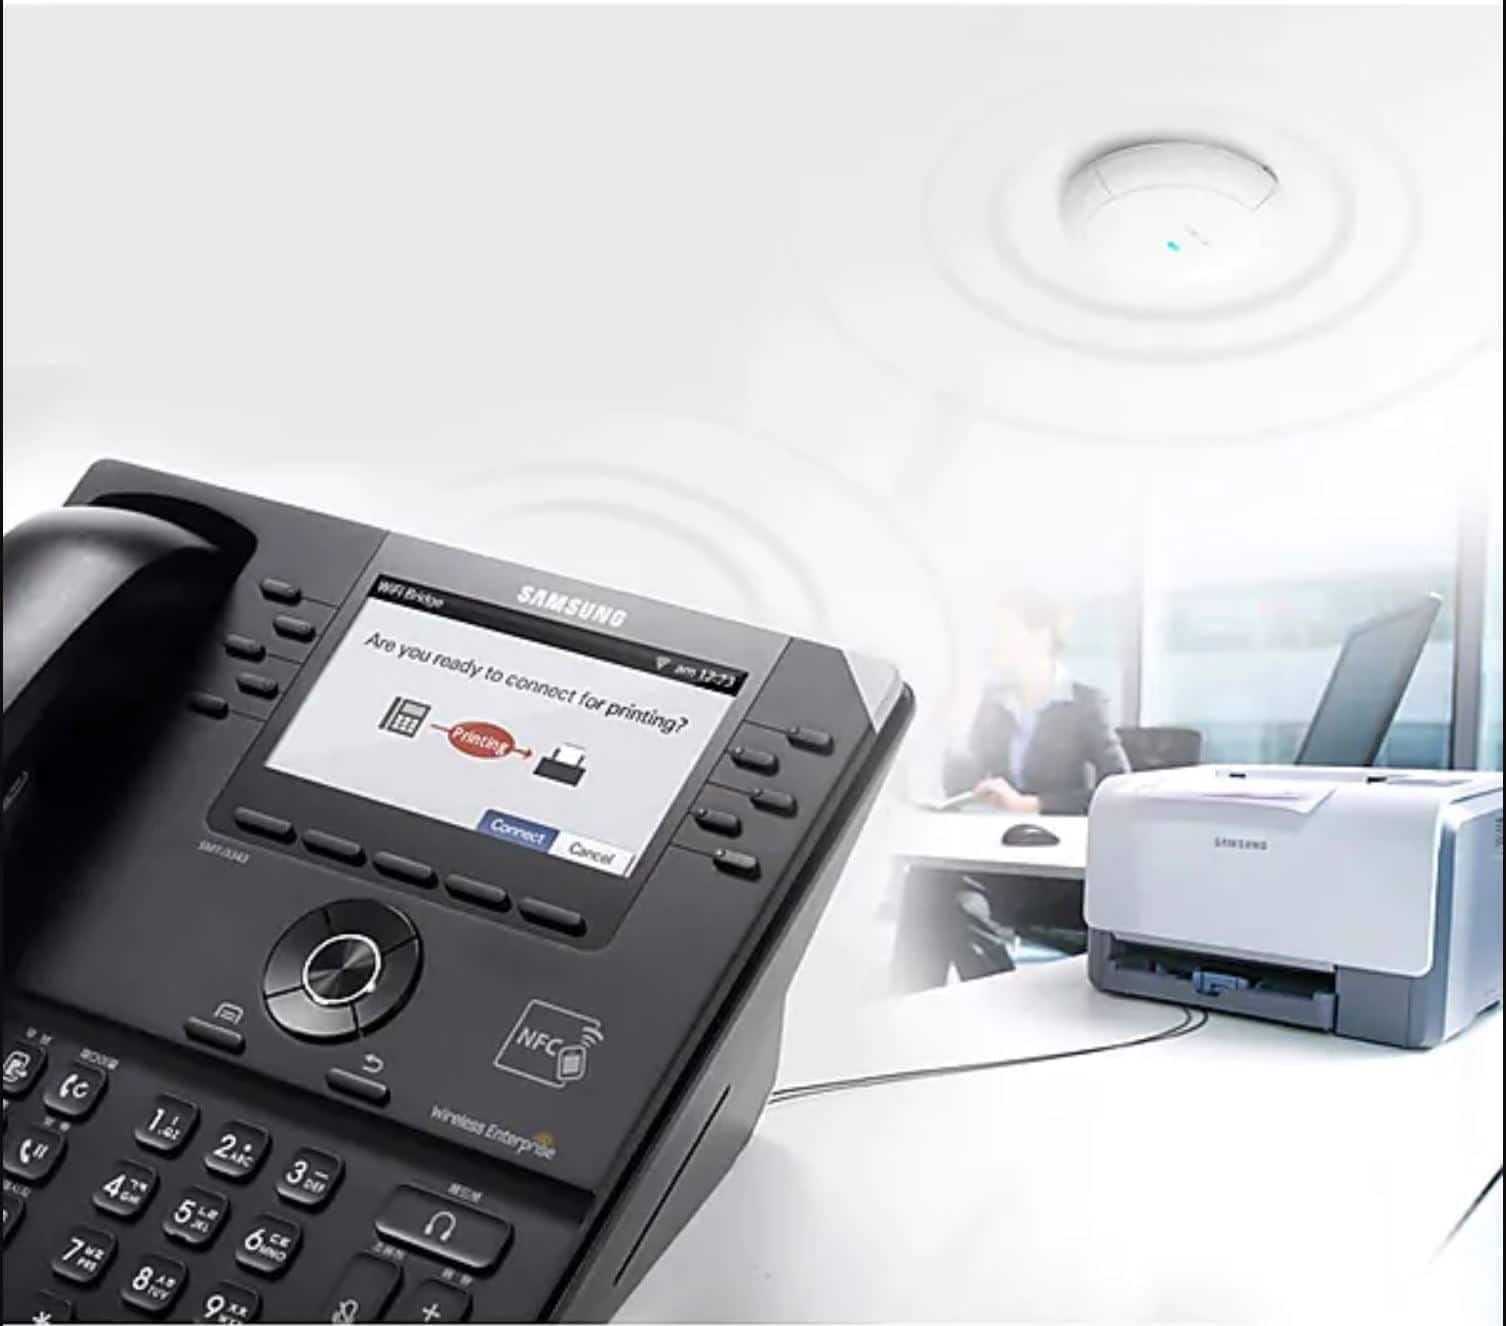 Samsung SMT-i5343 IP Phone - Products - Telephone Systems